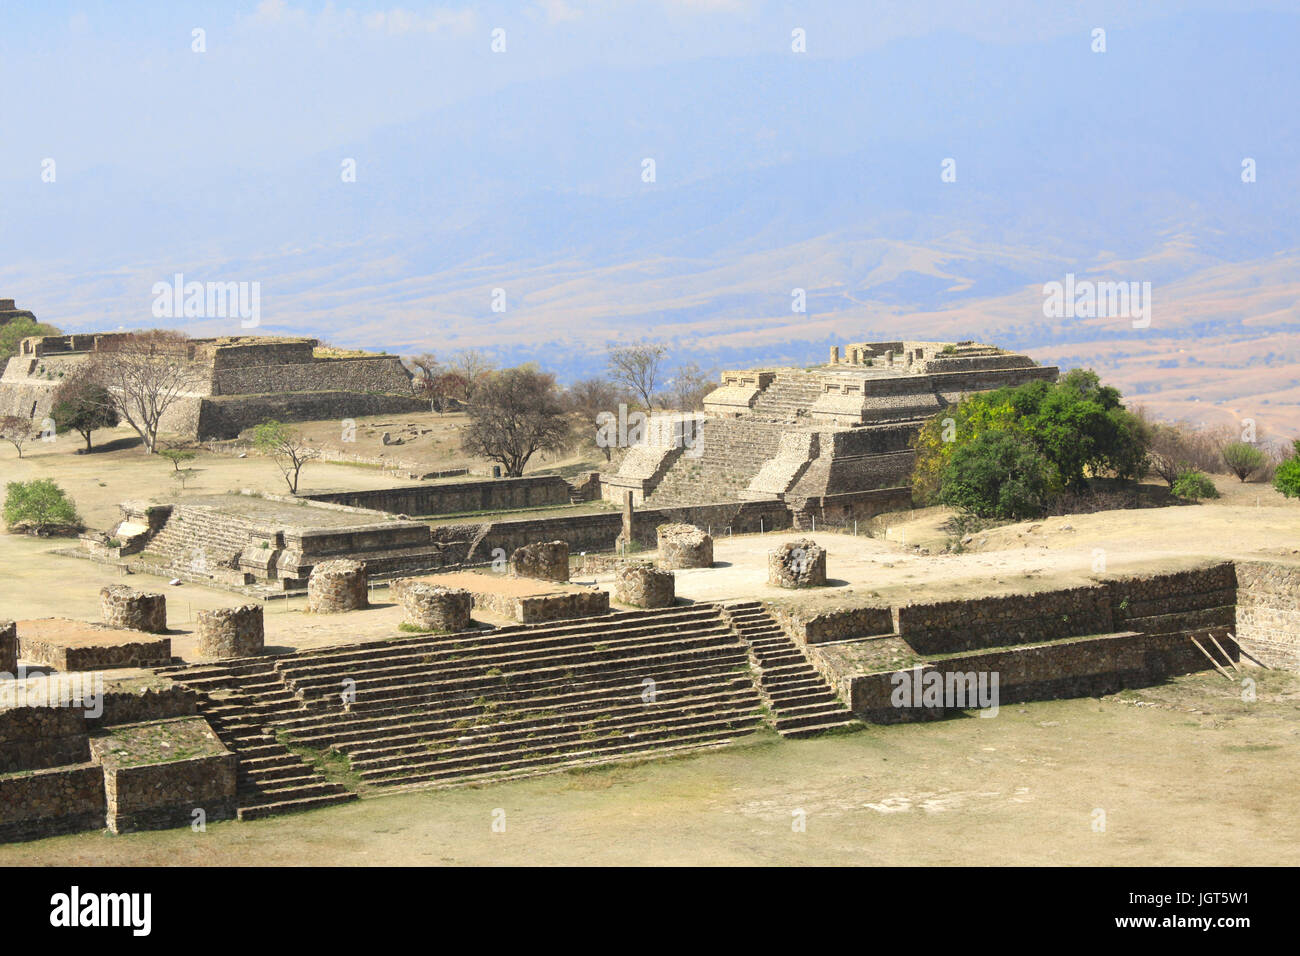 Top view on ruins of Mayan pyramids in sacred site Monte Alban, Oaxaca, Mexico, North America. UNESCO world heritage site Stock Photo